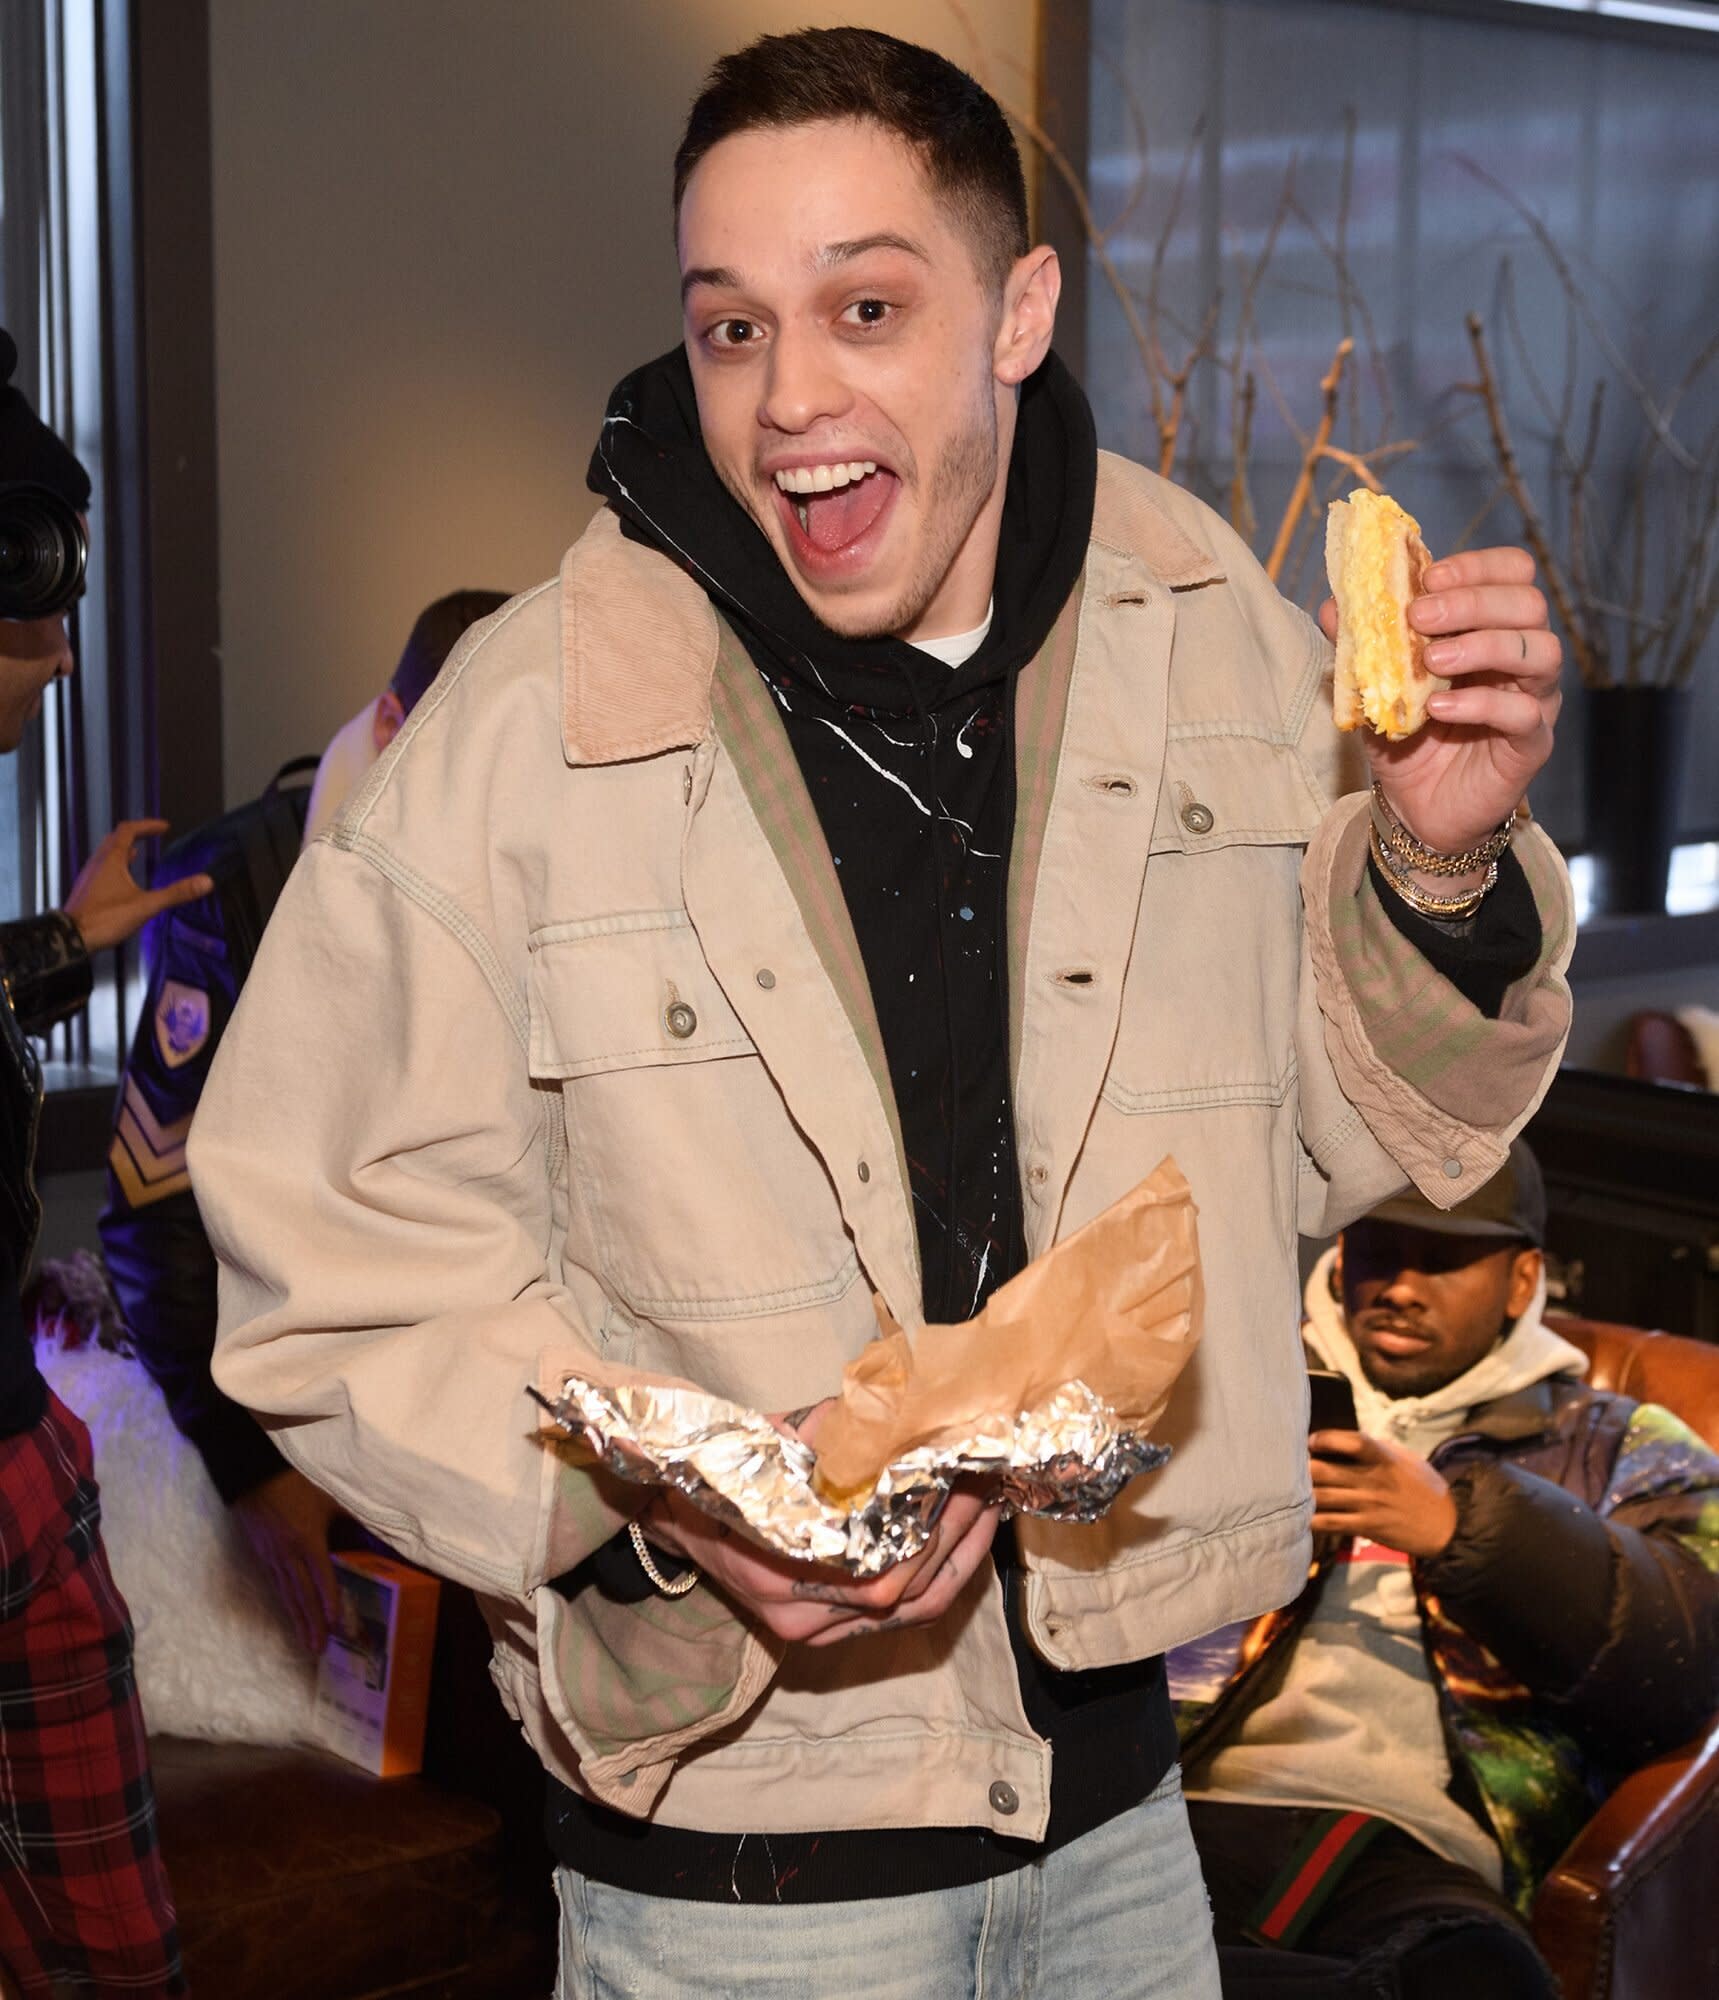 Pete Davidson's Summer Comedy King of Staten Island Skips Theaters for